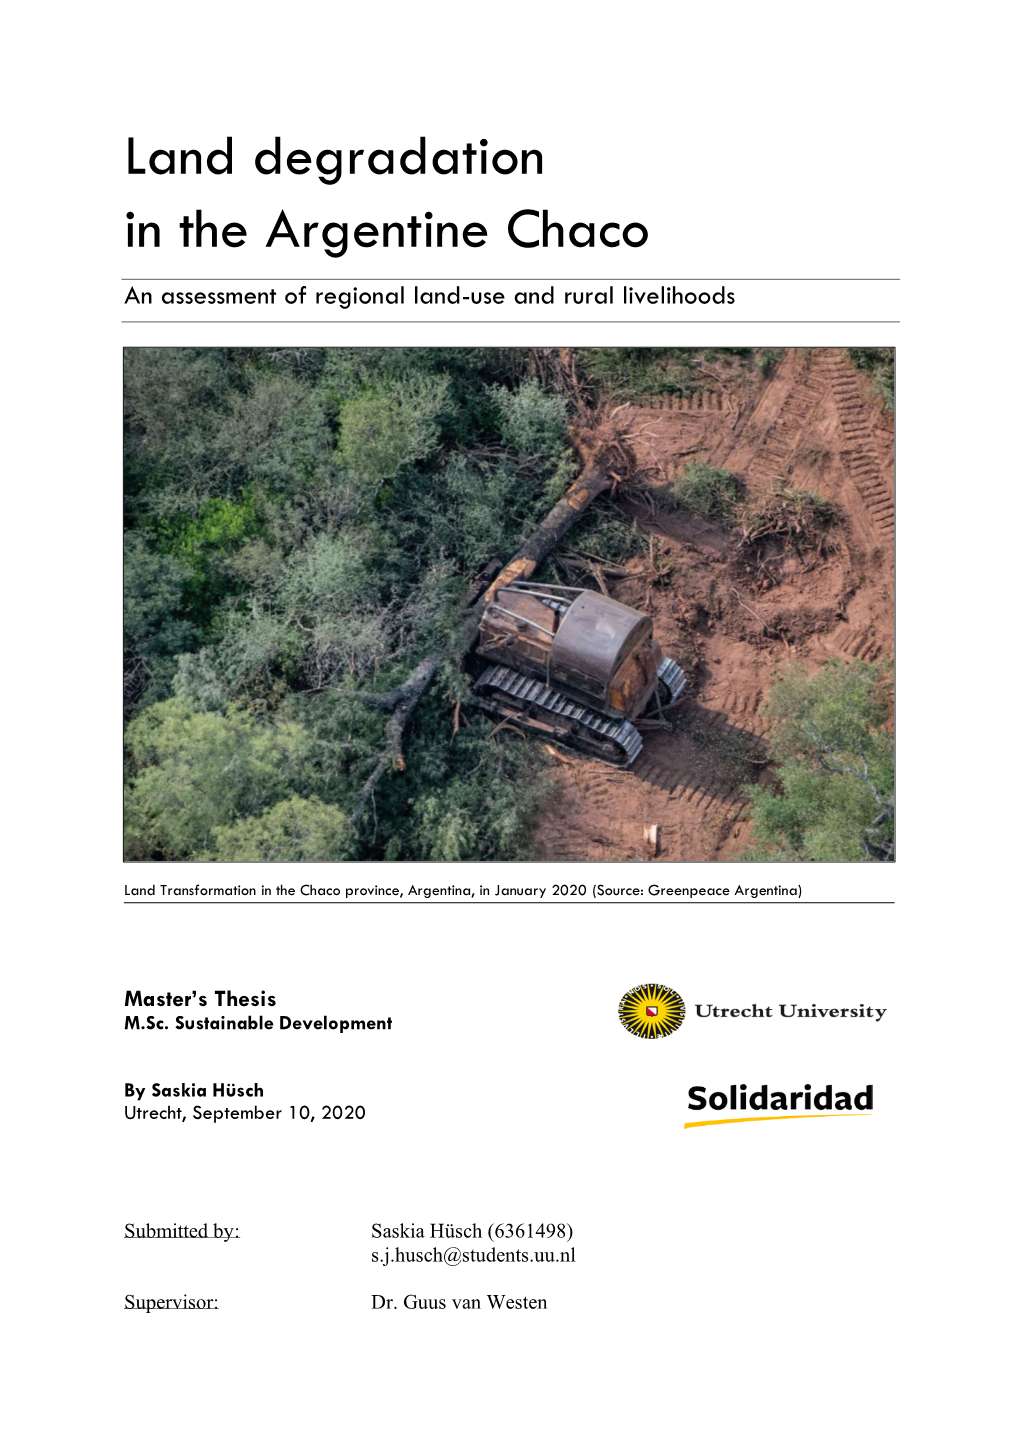 Land Degradation in the Argentine Chaco an Assessment of Regional Land-Use and Rural Livelihoods